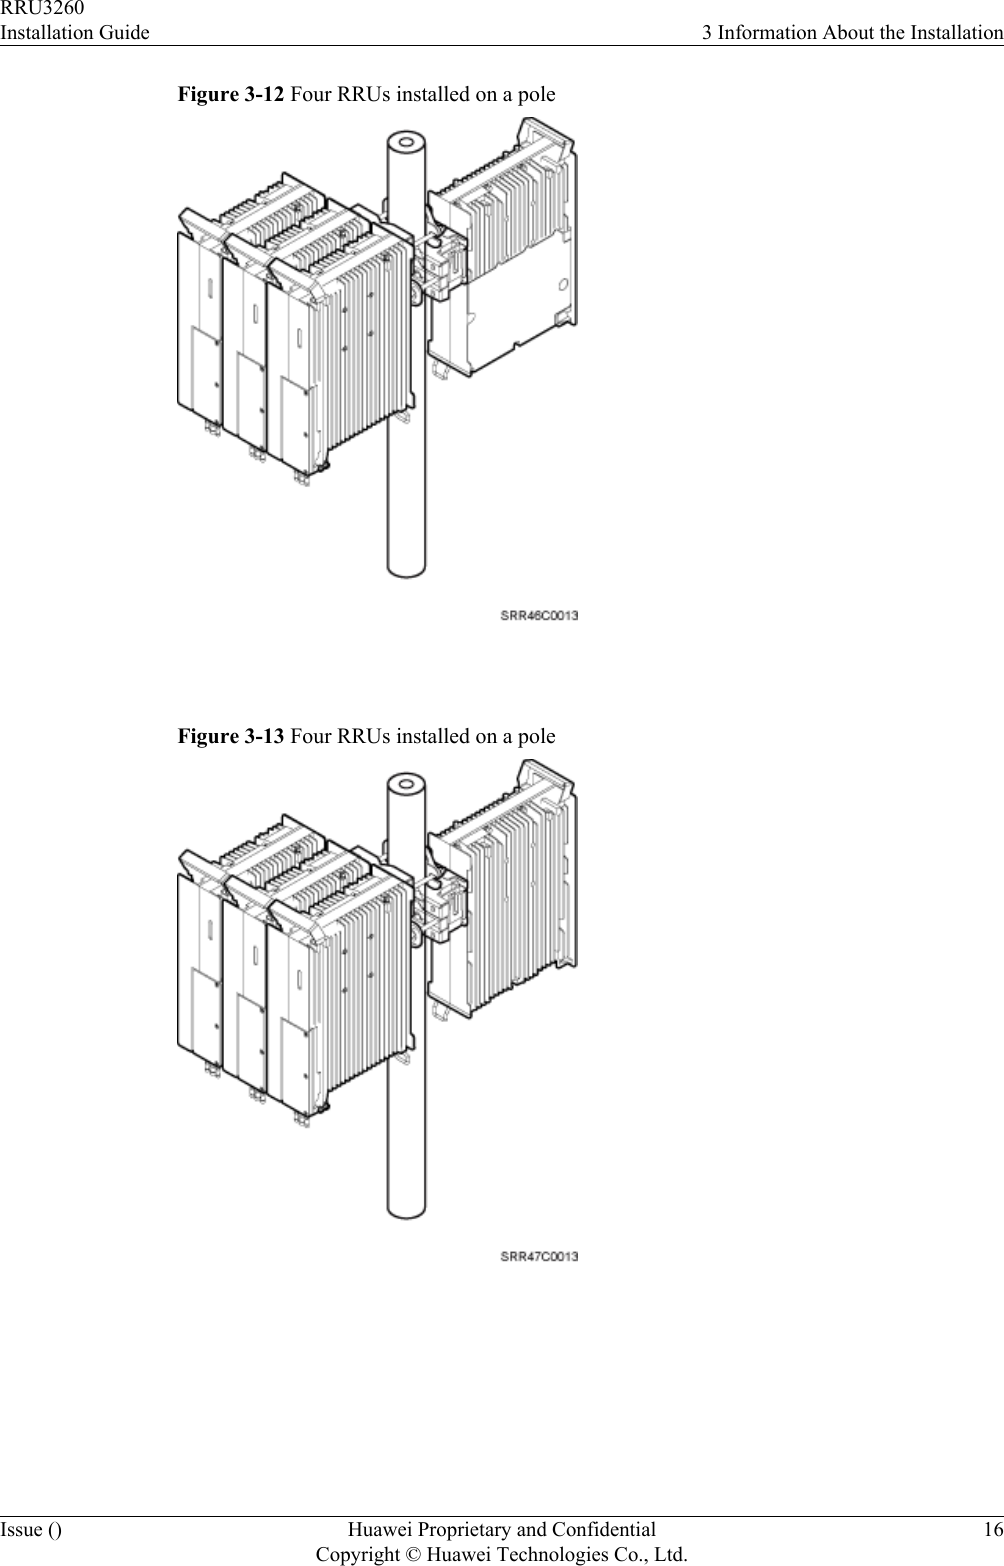 Figure 3-12 Four RRUs installed on a pole Figure 3-13 Four RRUs installed on a pole RRU3260Installation Guide 3 Information About the InstallationIssue () Huawei Proprietary and ConfidentialCopyright © Huawei Technologies Co., Ltd.16